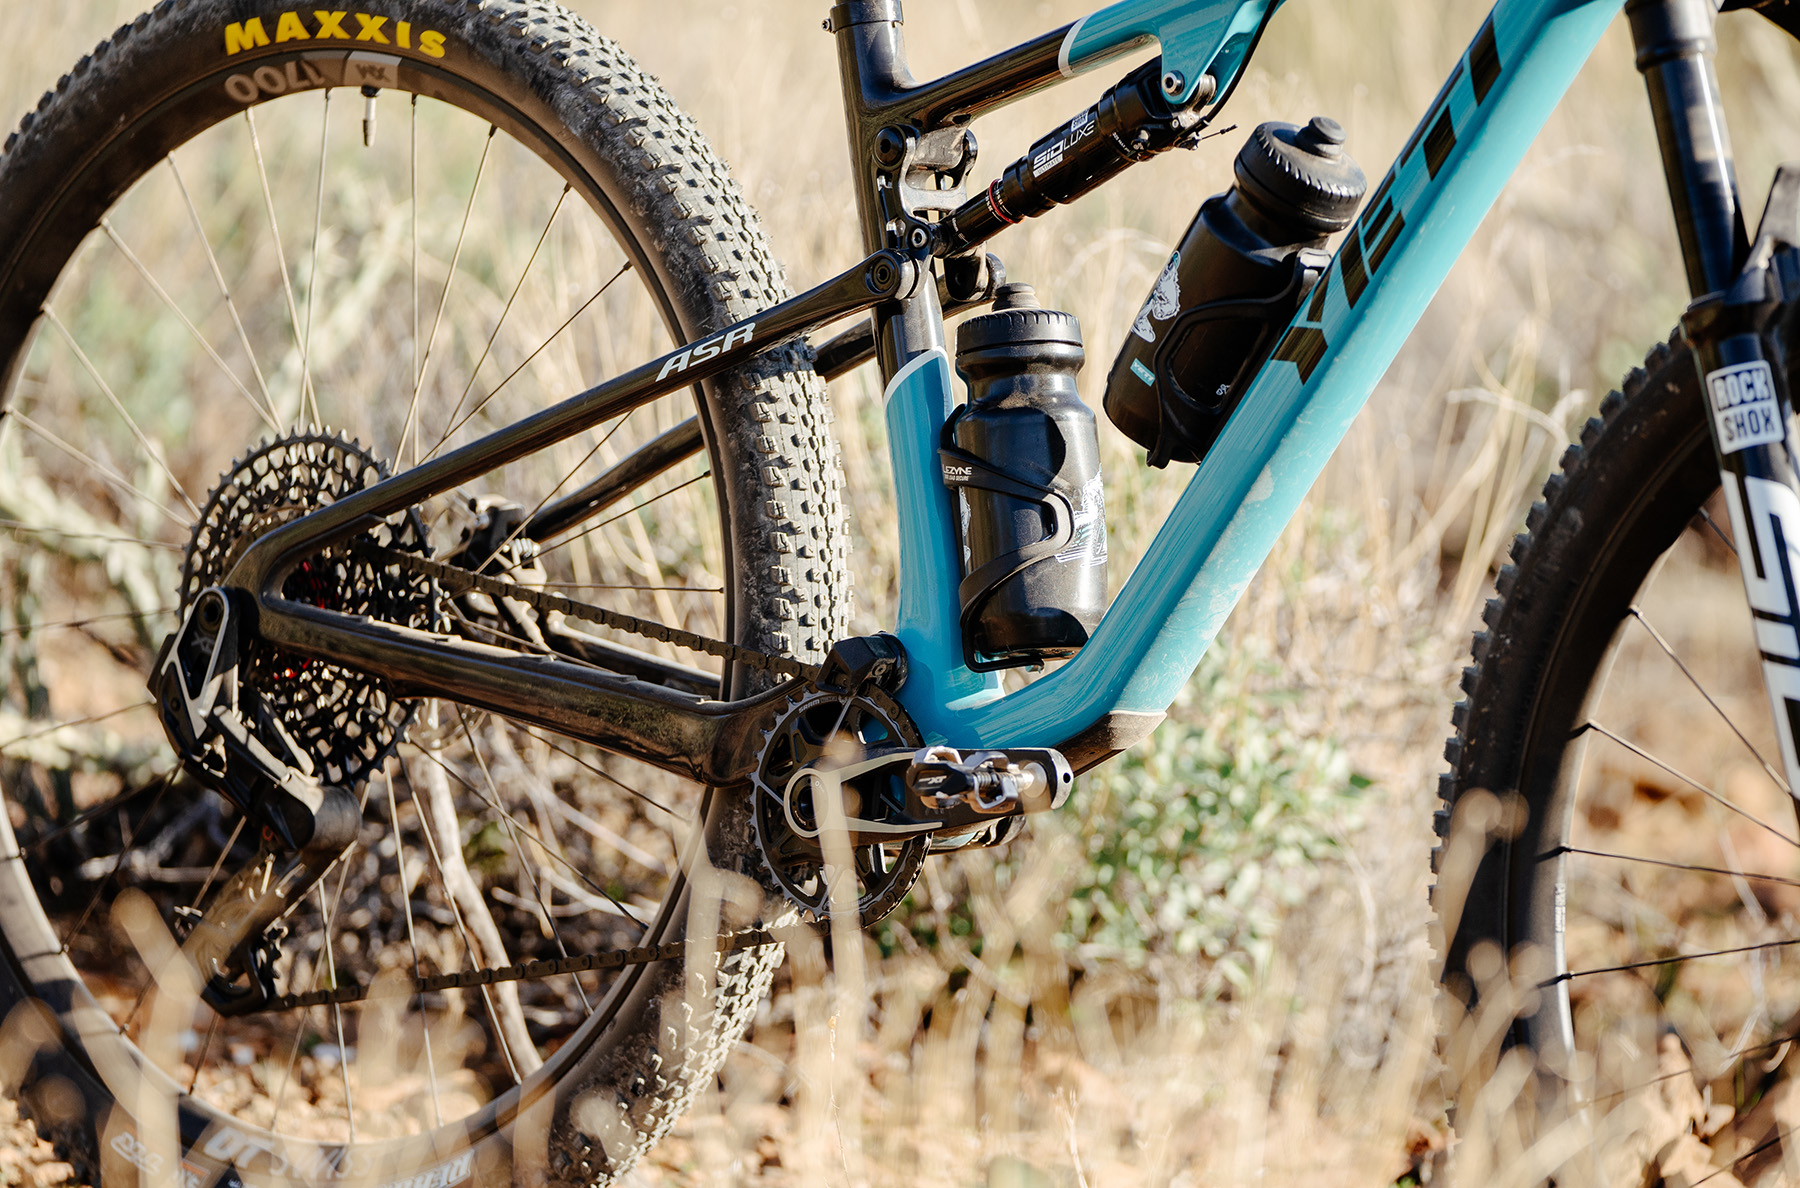 Dylan Wood Reviews the Yeti ASR for Blister